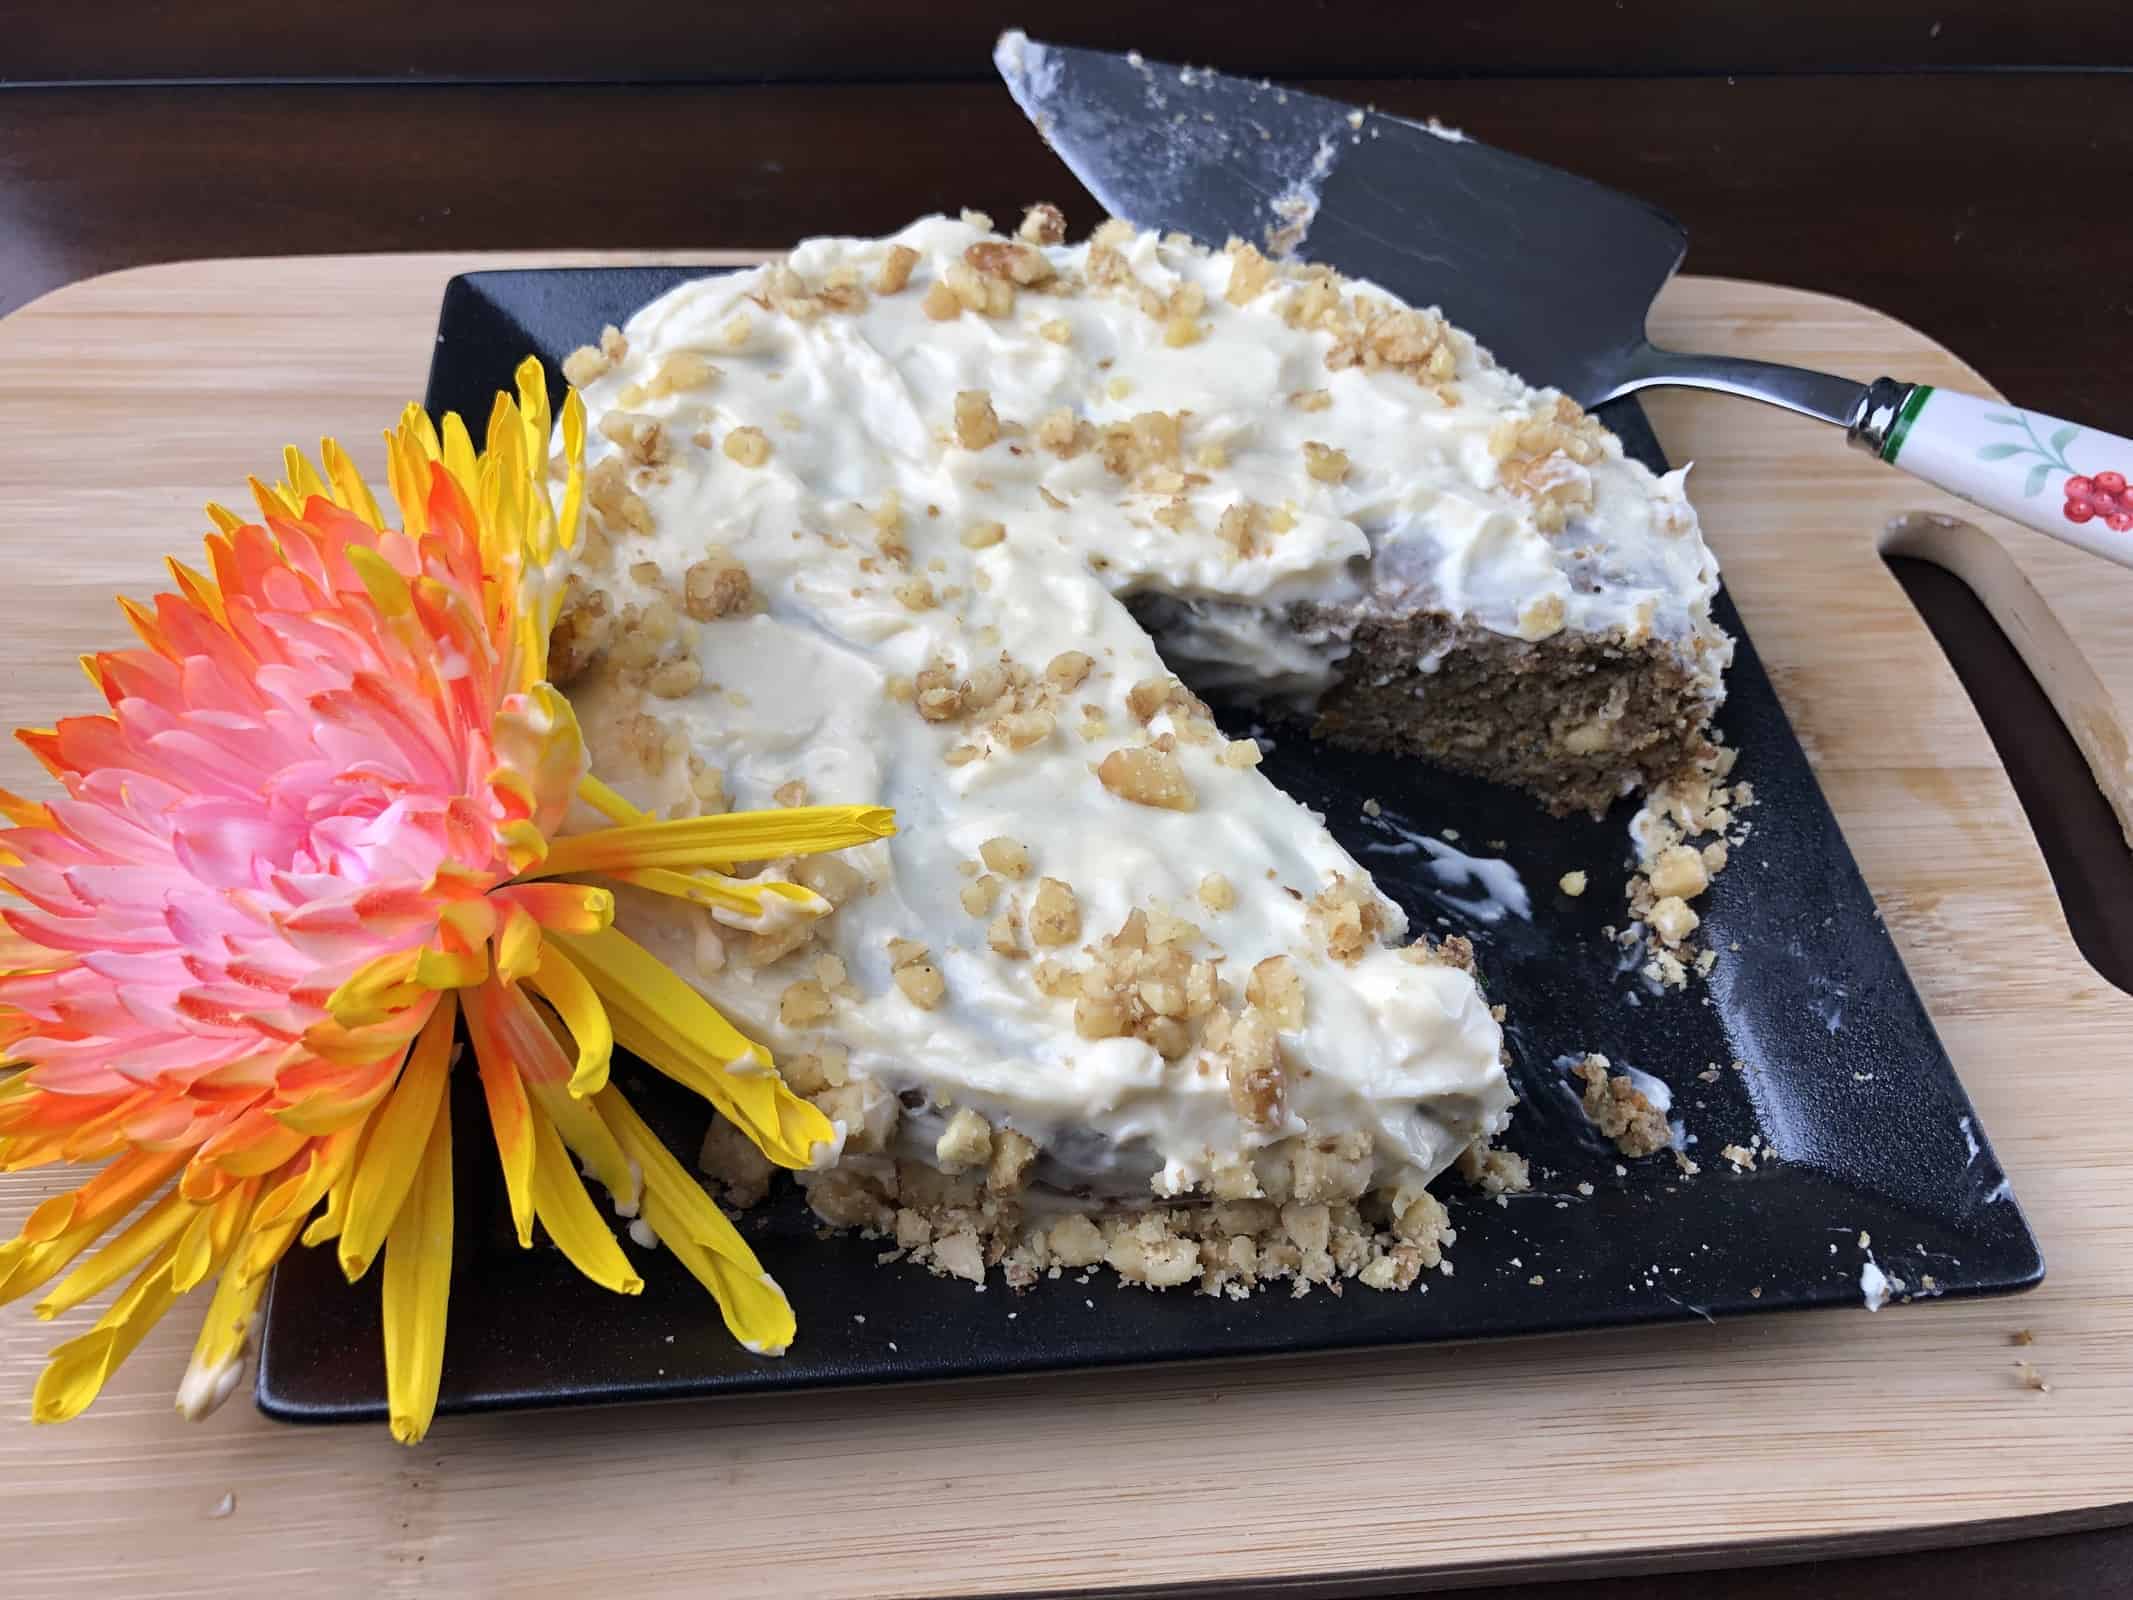 Keto Carrot Cake with cram cheese frosting and walnuts sprinkled on top on a black plate with a flower and a cake server on a wooden cutting board